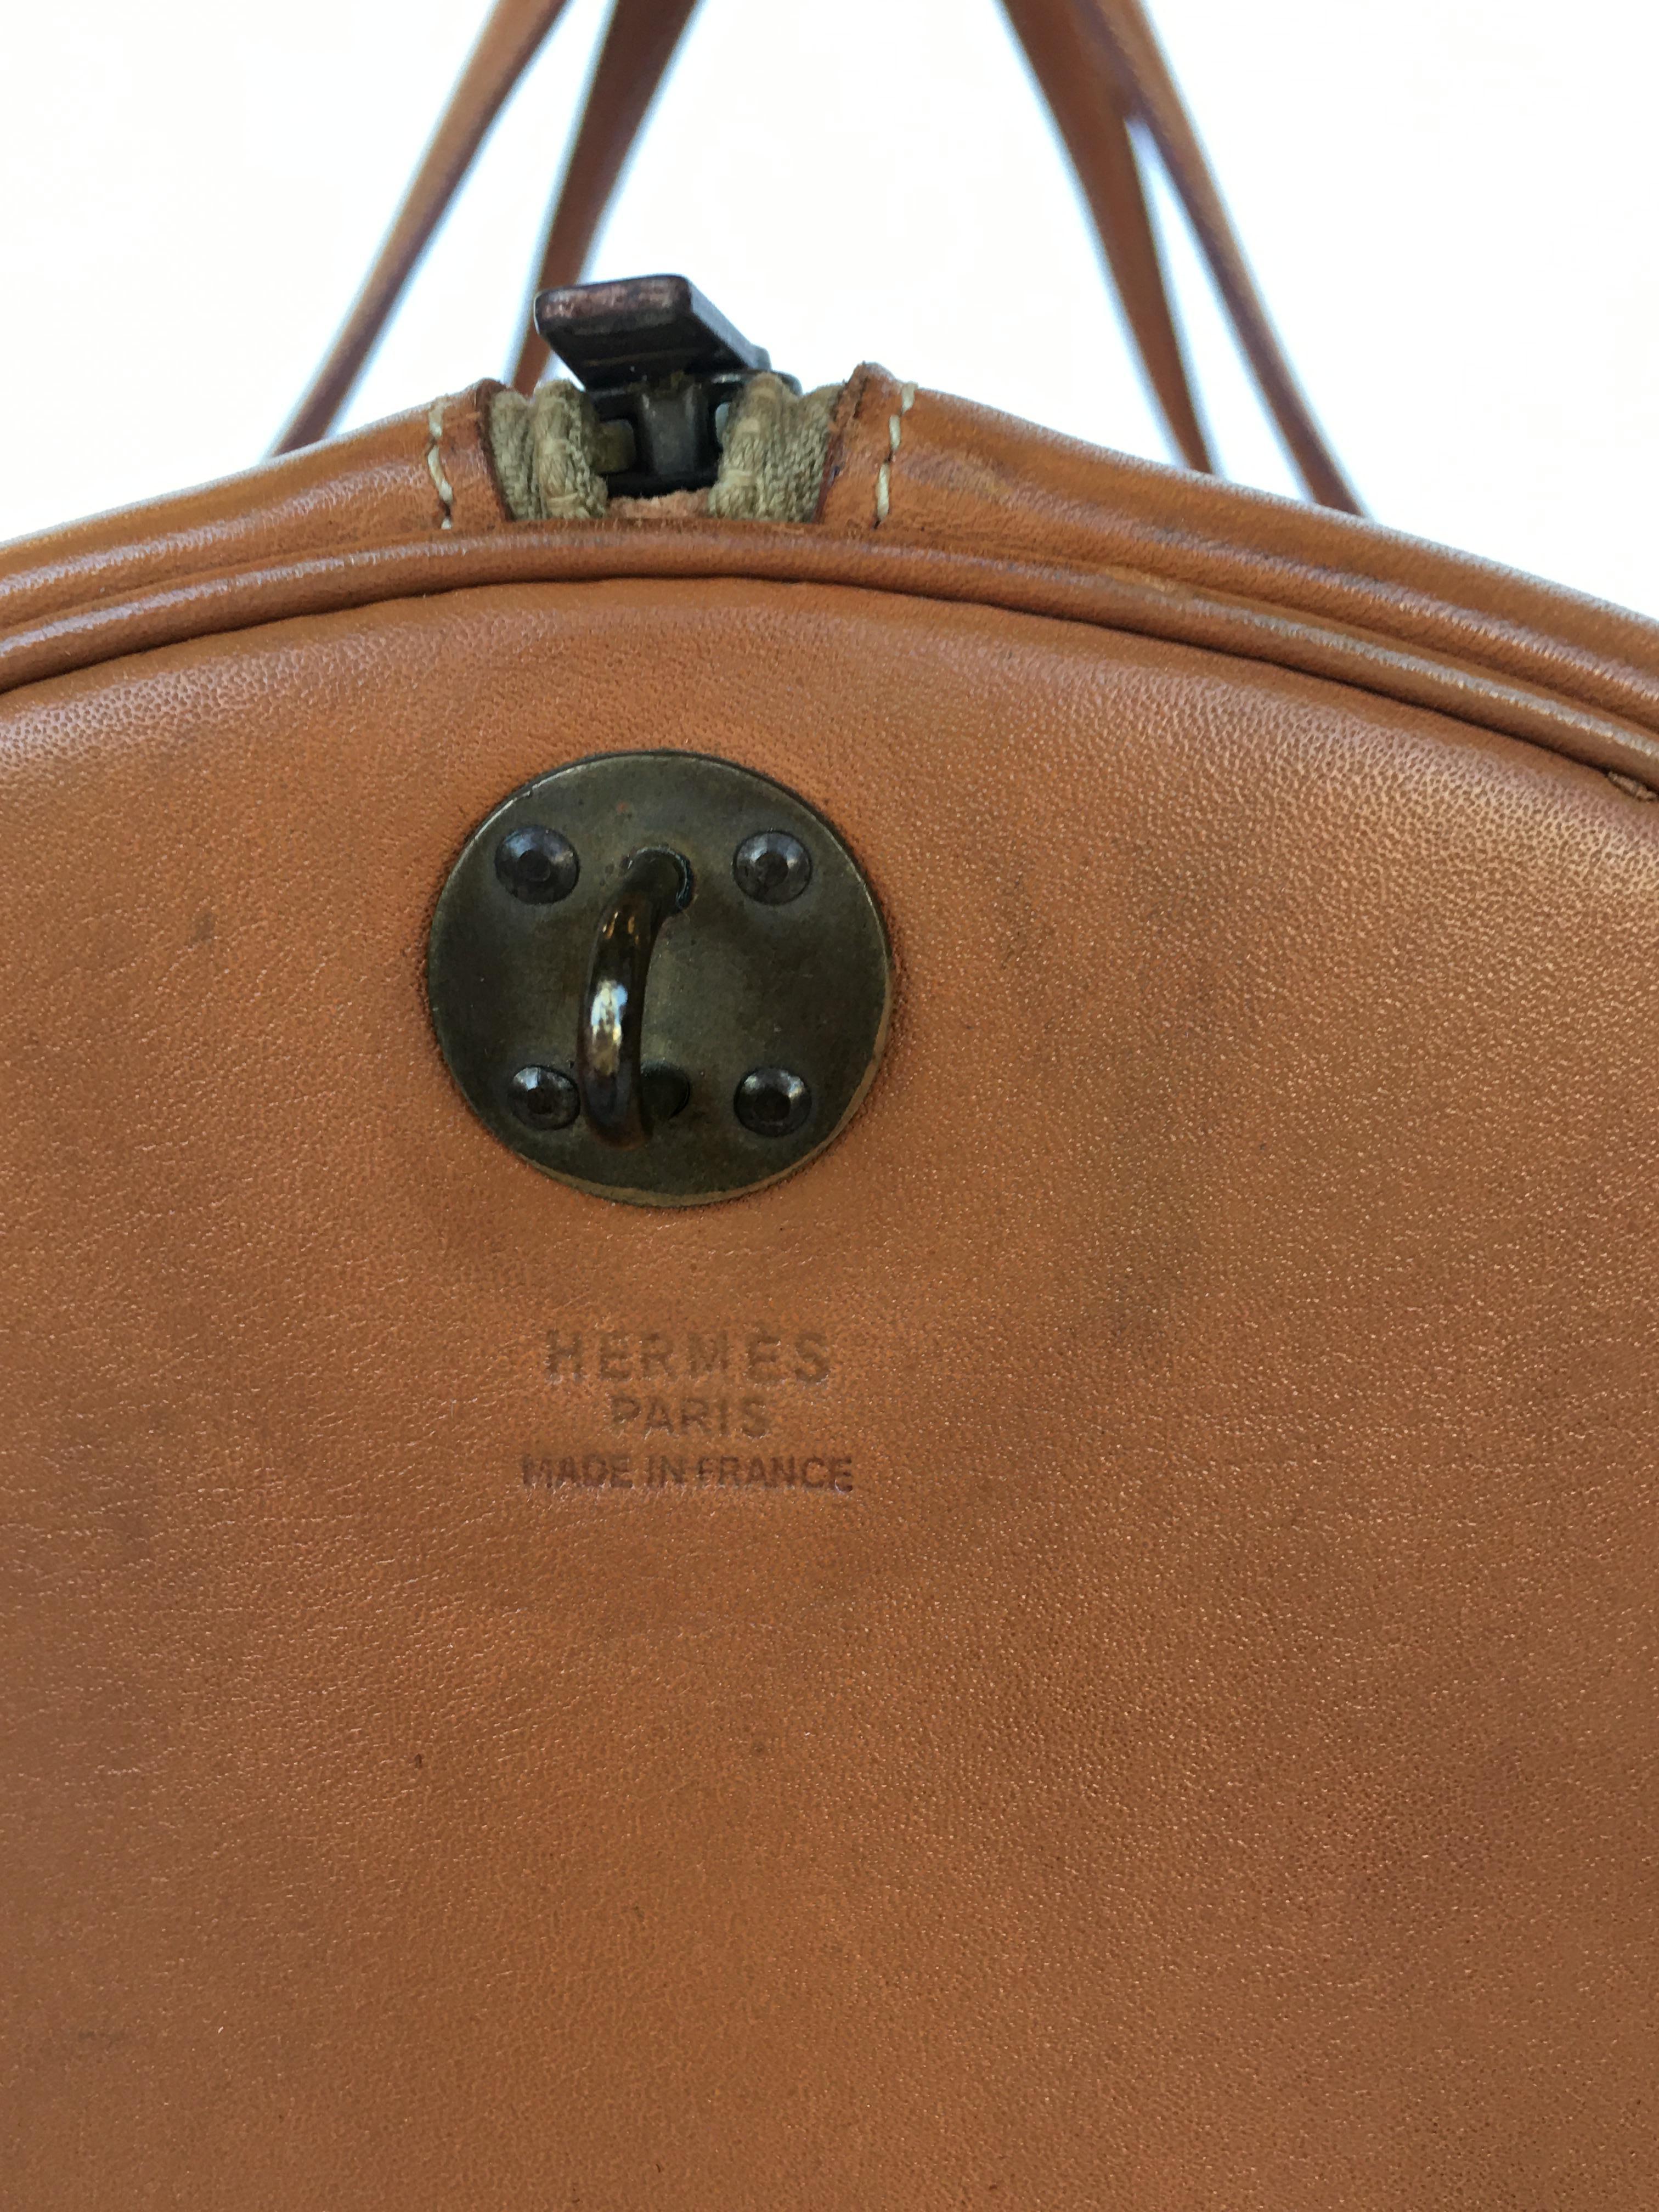 20th Century Hermes Brown Leather Travel Bag, 1960s